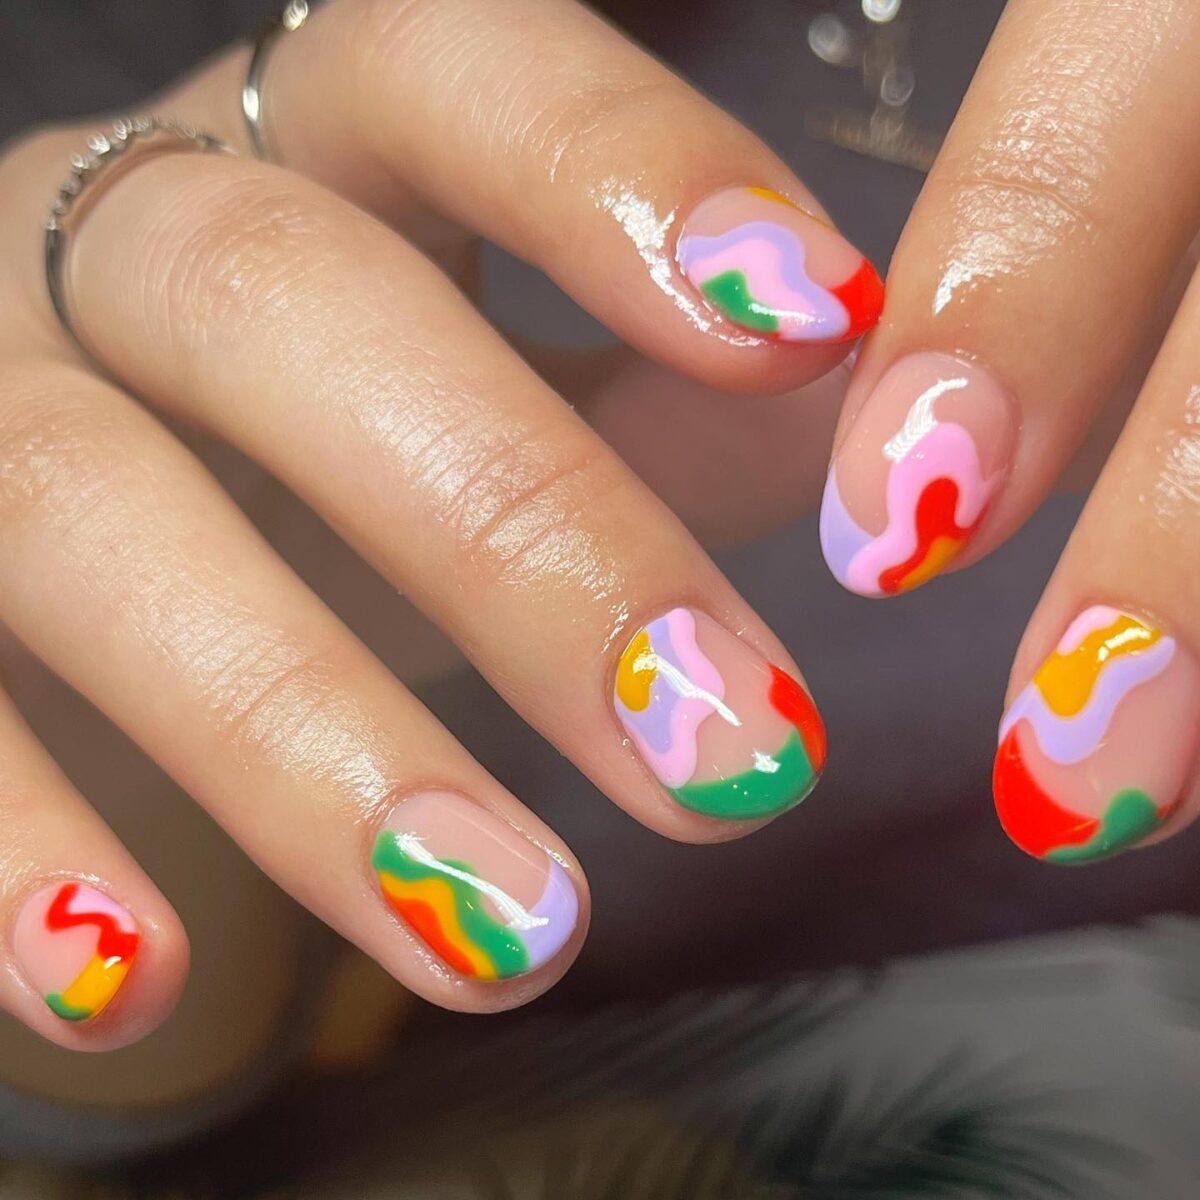 Nails with colorful squiggles